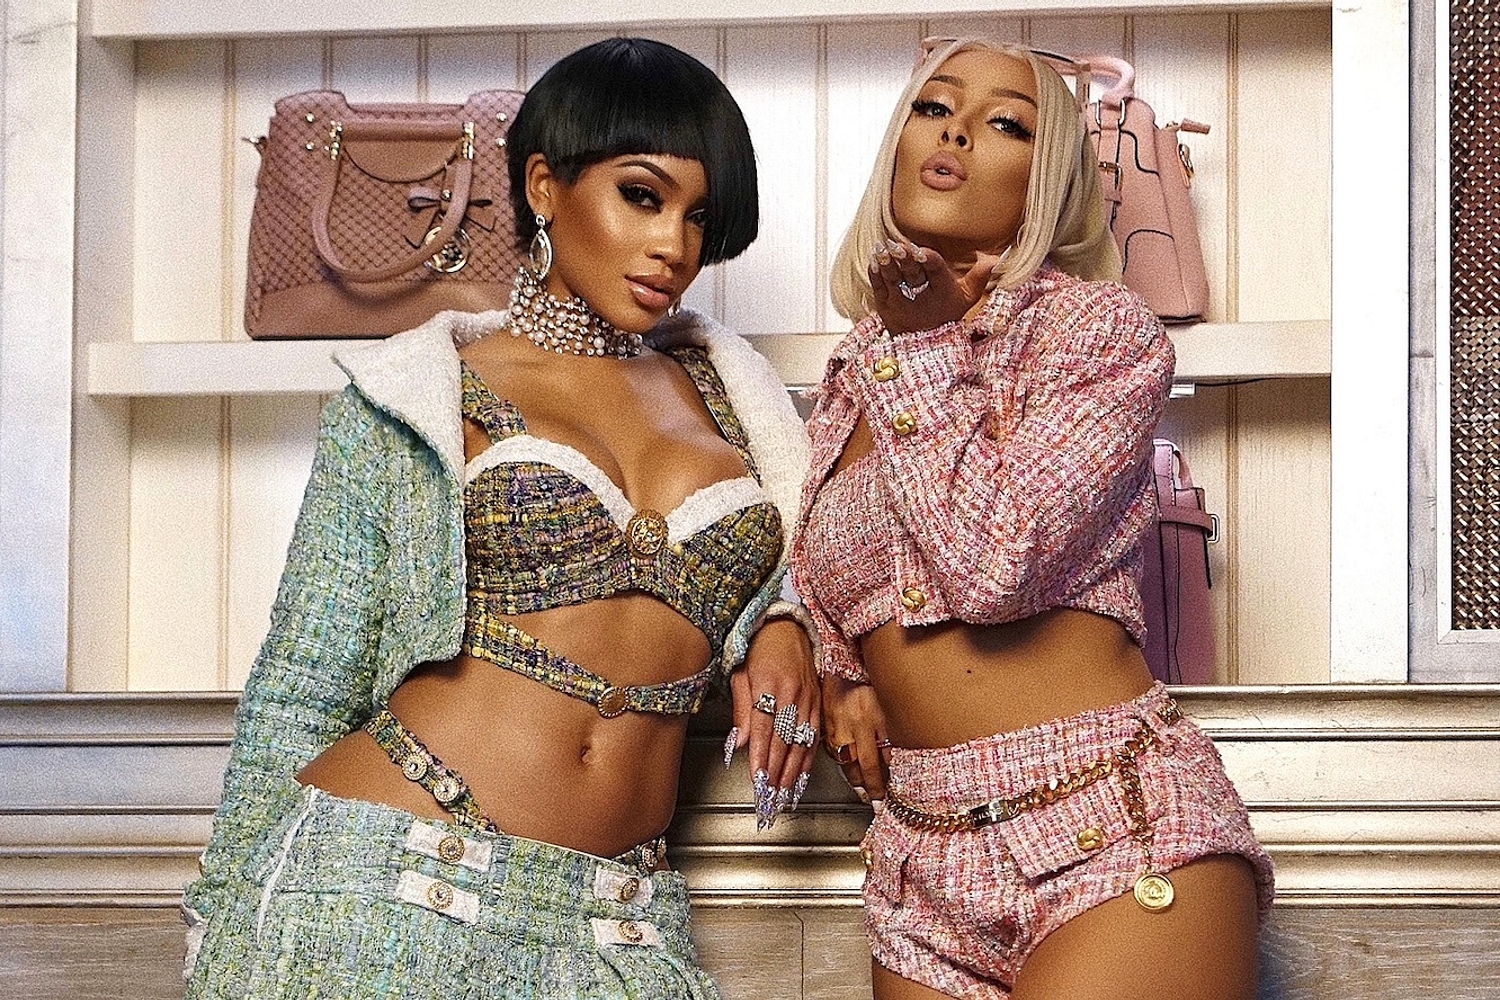 Doja Cat and Saweetie link up for new track ‘Best Friend’